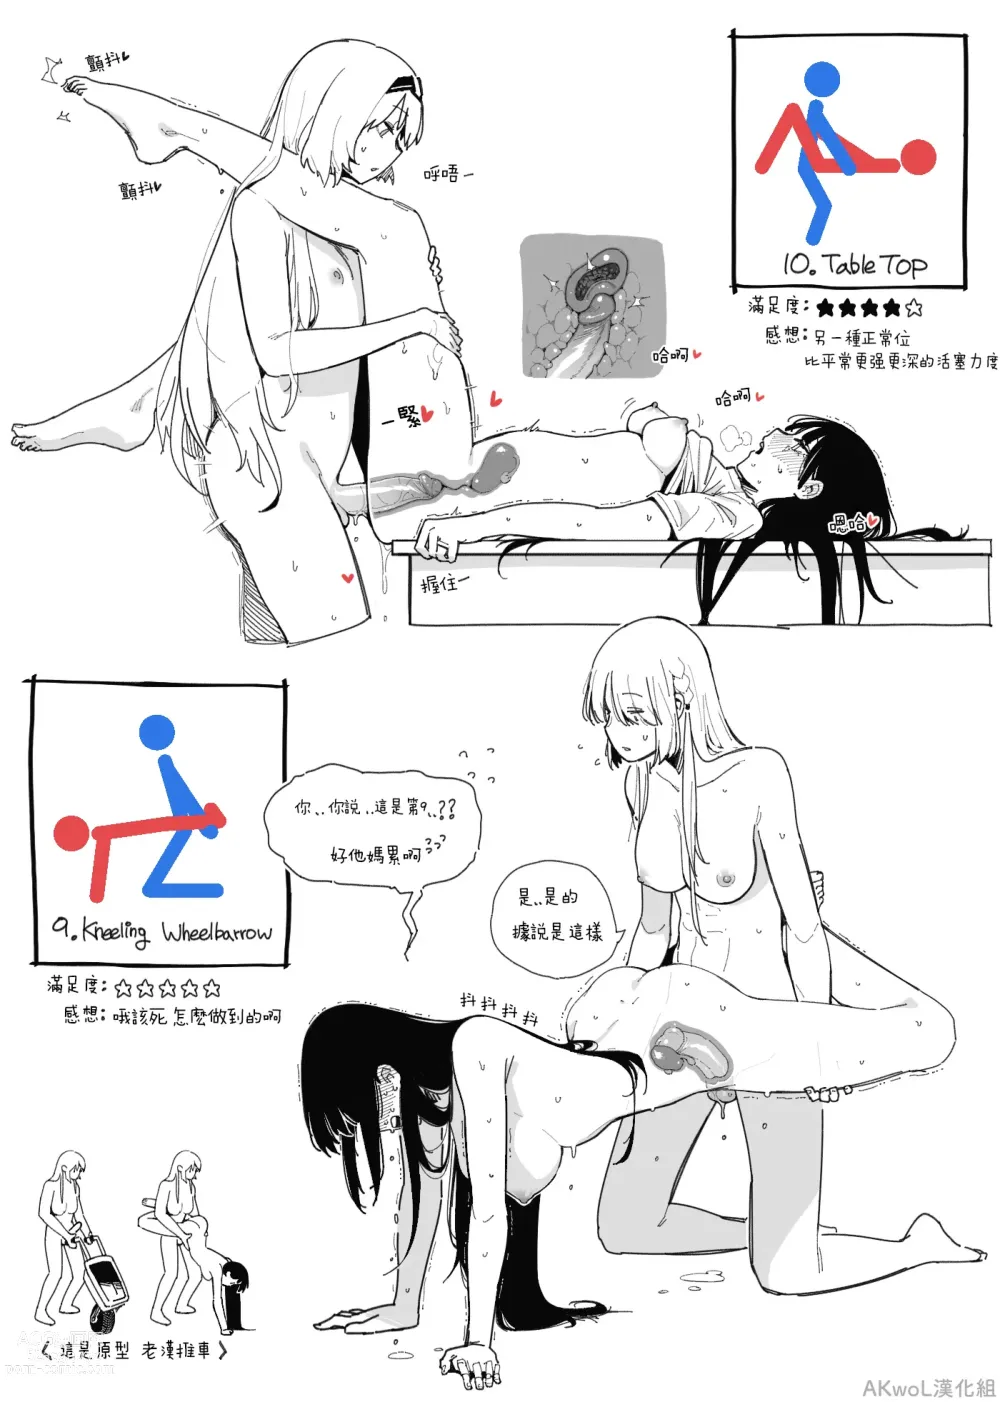 Page 7 of doujinshi Sex Position part1-3 (decensored)